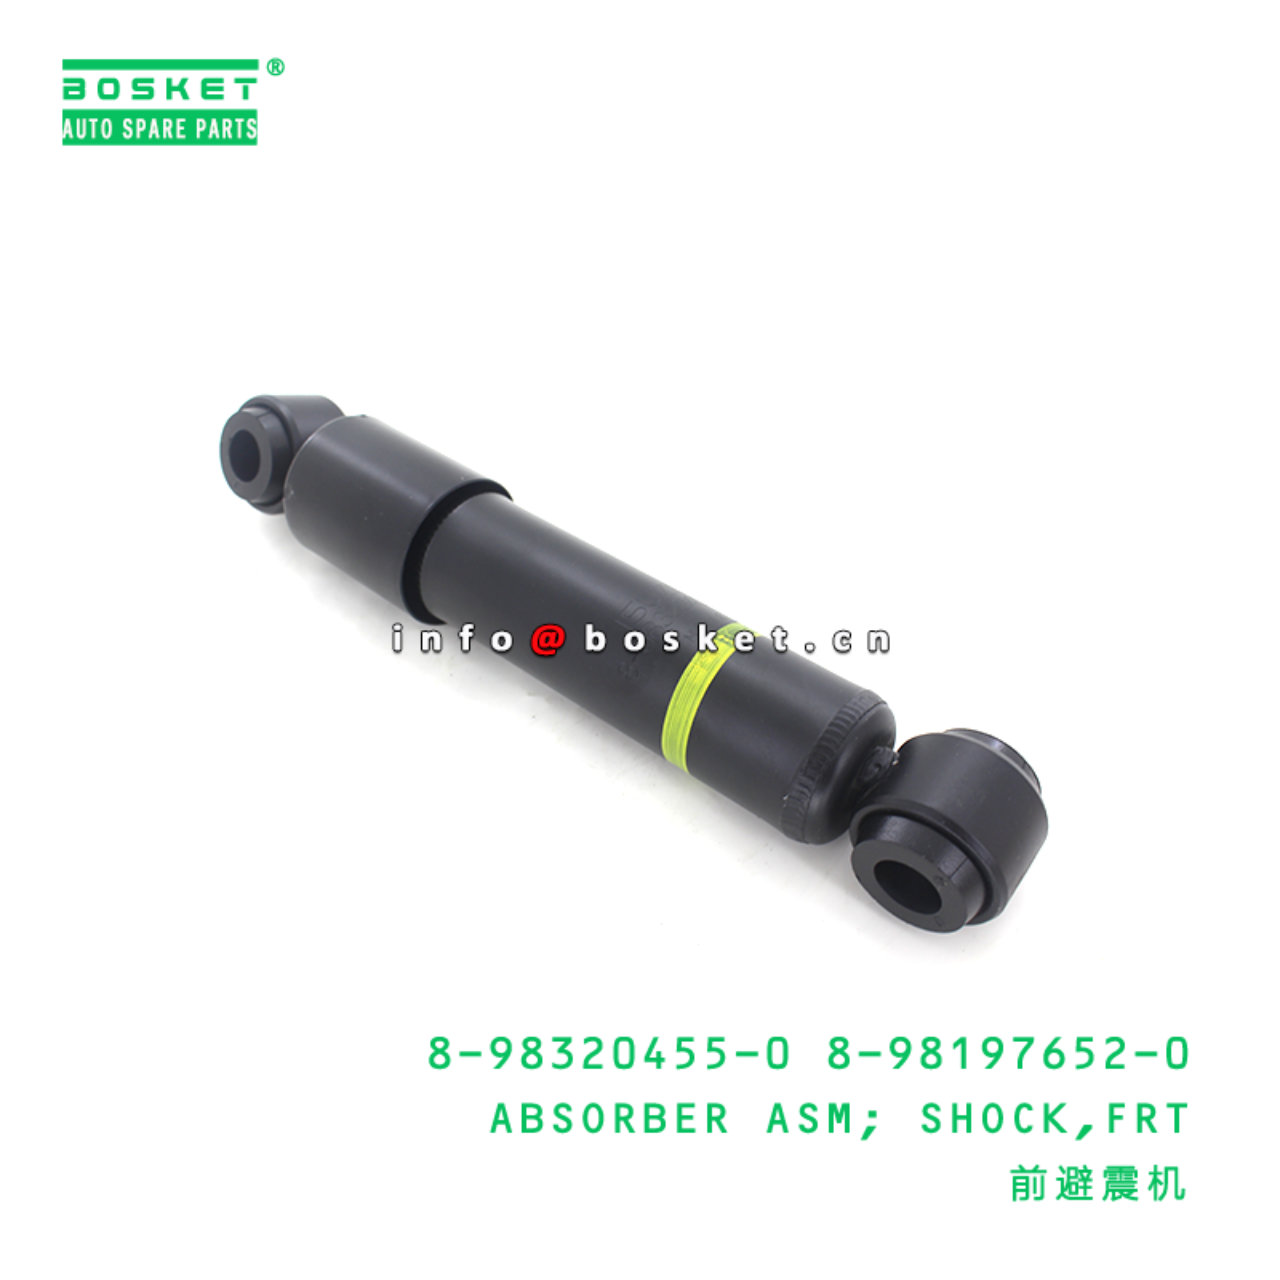 8-98320455-0 8-98197652-0 Front Shock Absorber Assembly 8983204550 8981976520 Suitable for ISUZU NMR